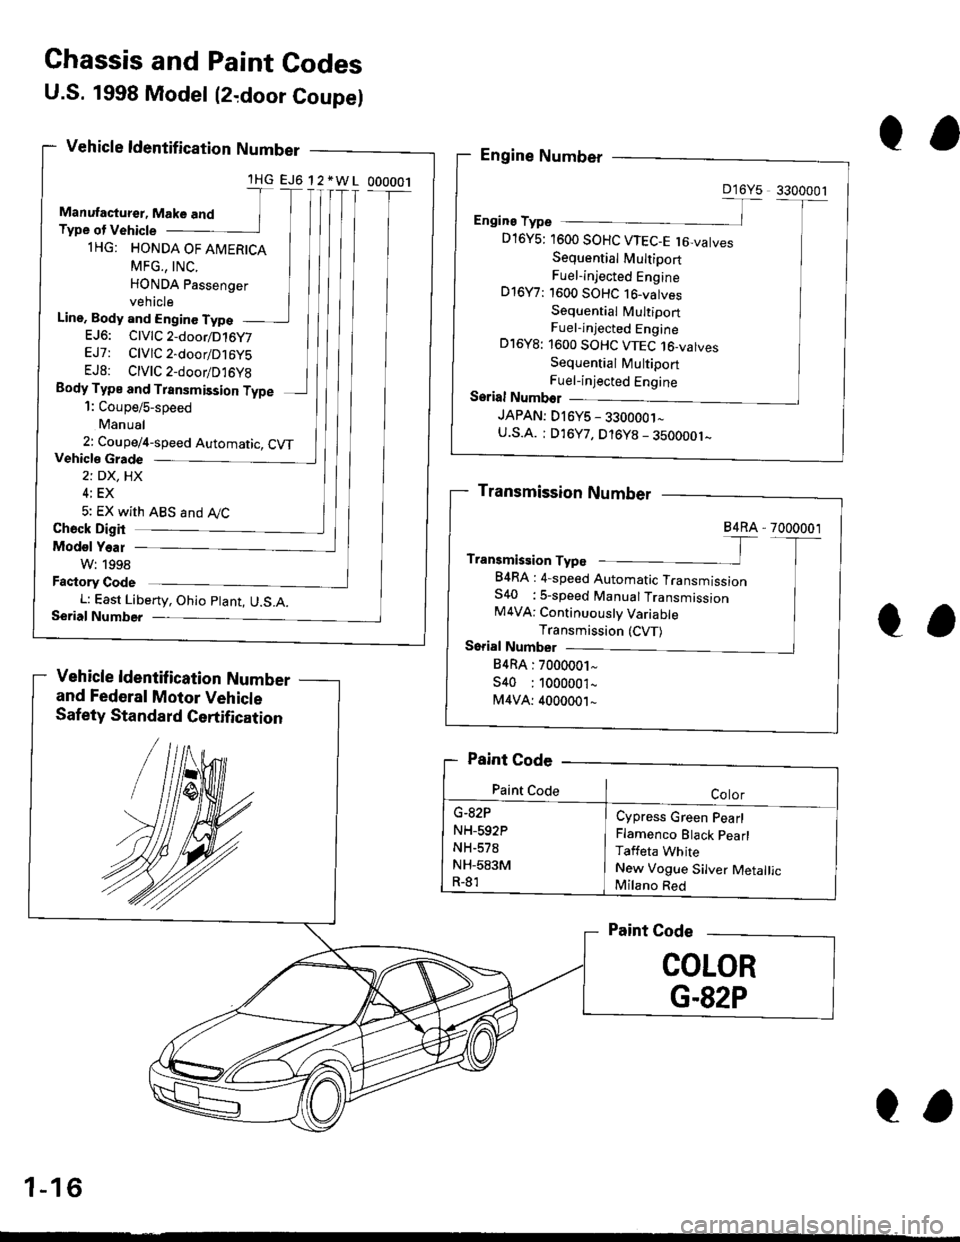 HONDA CIVIC 1997 6.G Workshop Manual Ghassis and Paint Codes
U.S. 1998 Model (2,door Coupel
Vehicle ldentif ication Number
and Federal Motor Vehicle
Safety Standard Certification
lHG EJ6 12*WL 000001
Line, Body and Enginc TypeEJ6: ClVlC2